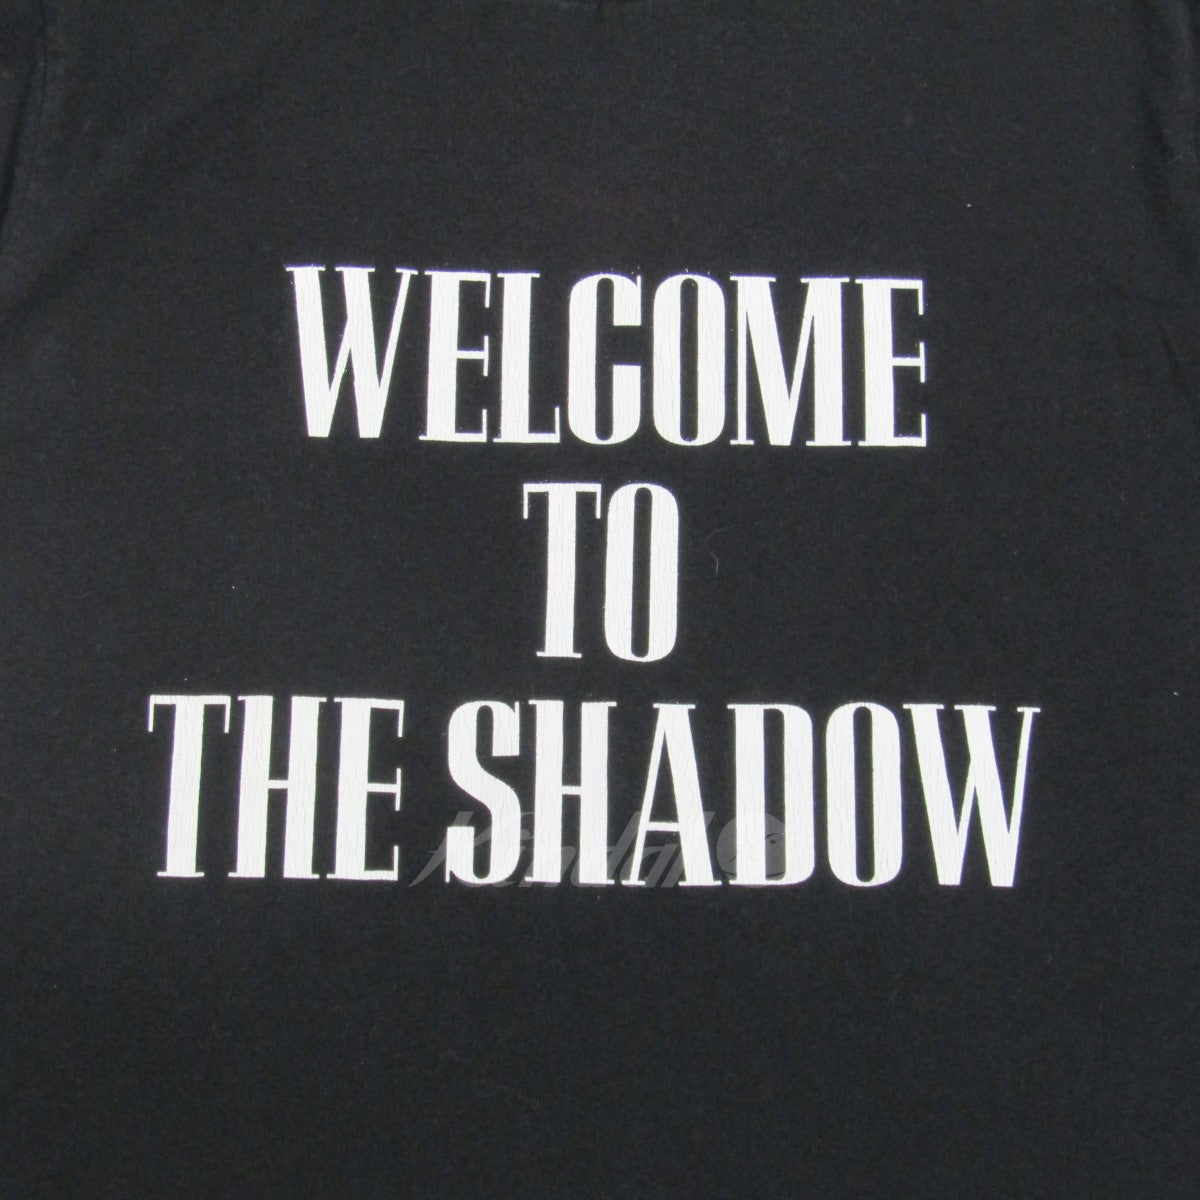 2006SS ガンズ期 旧宮下期 WELCOME TO THE SHADOW 半袖Tシャツ